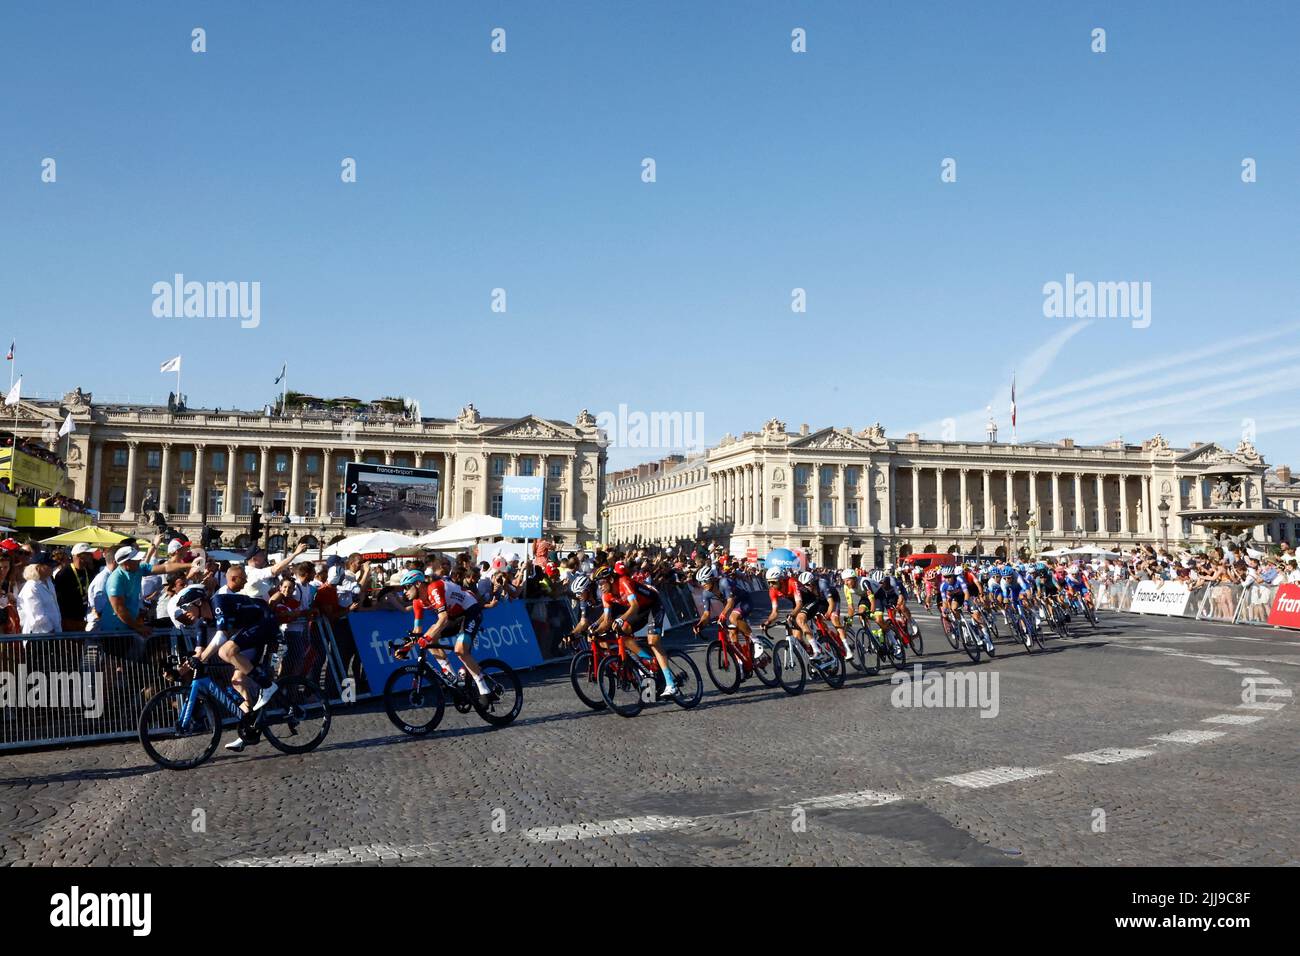 Cycling - Tour de France - Stage 21 - Paris La Defense Arena to Champs-Elysees - France - July 24, 2022 General view of riders in action passing the Arc de Triomphe during stage 21 REUTERS/Gonzalo Fuentes Stock Photo